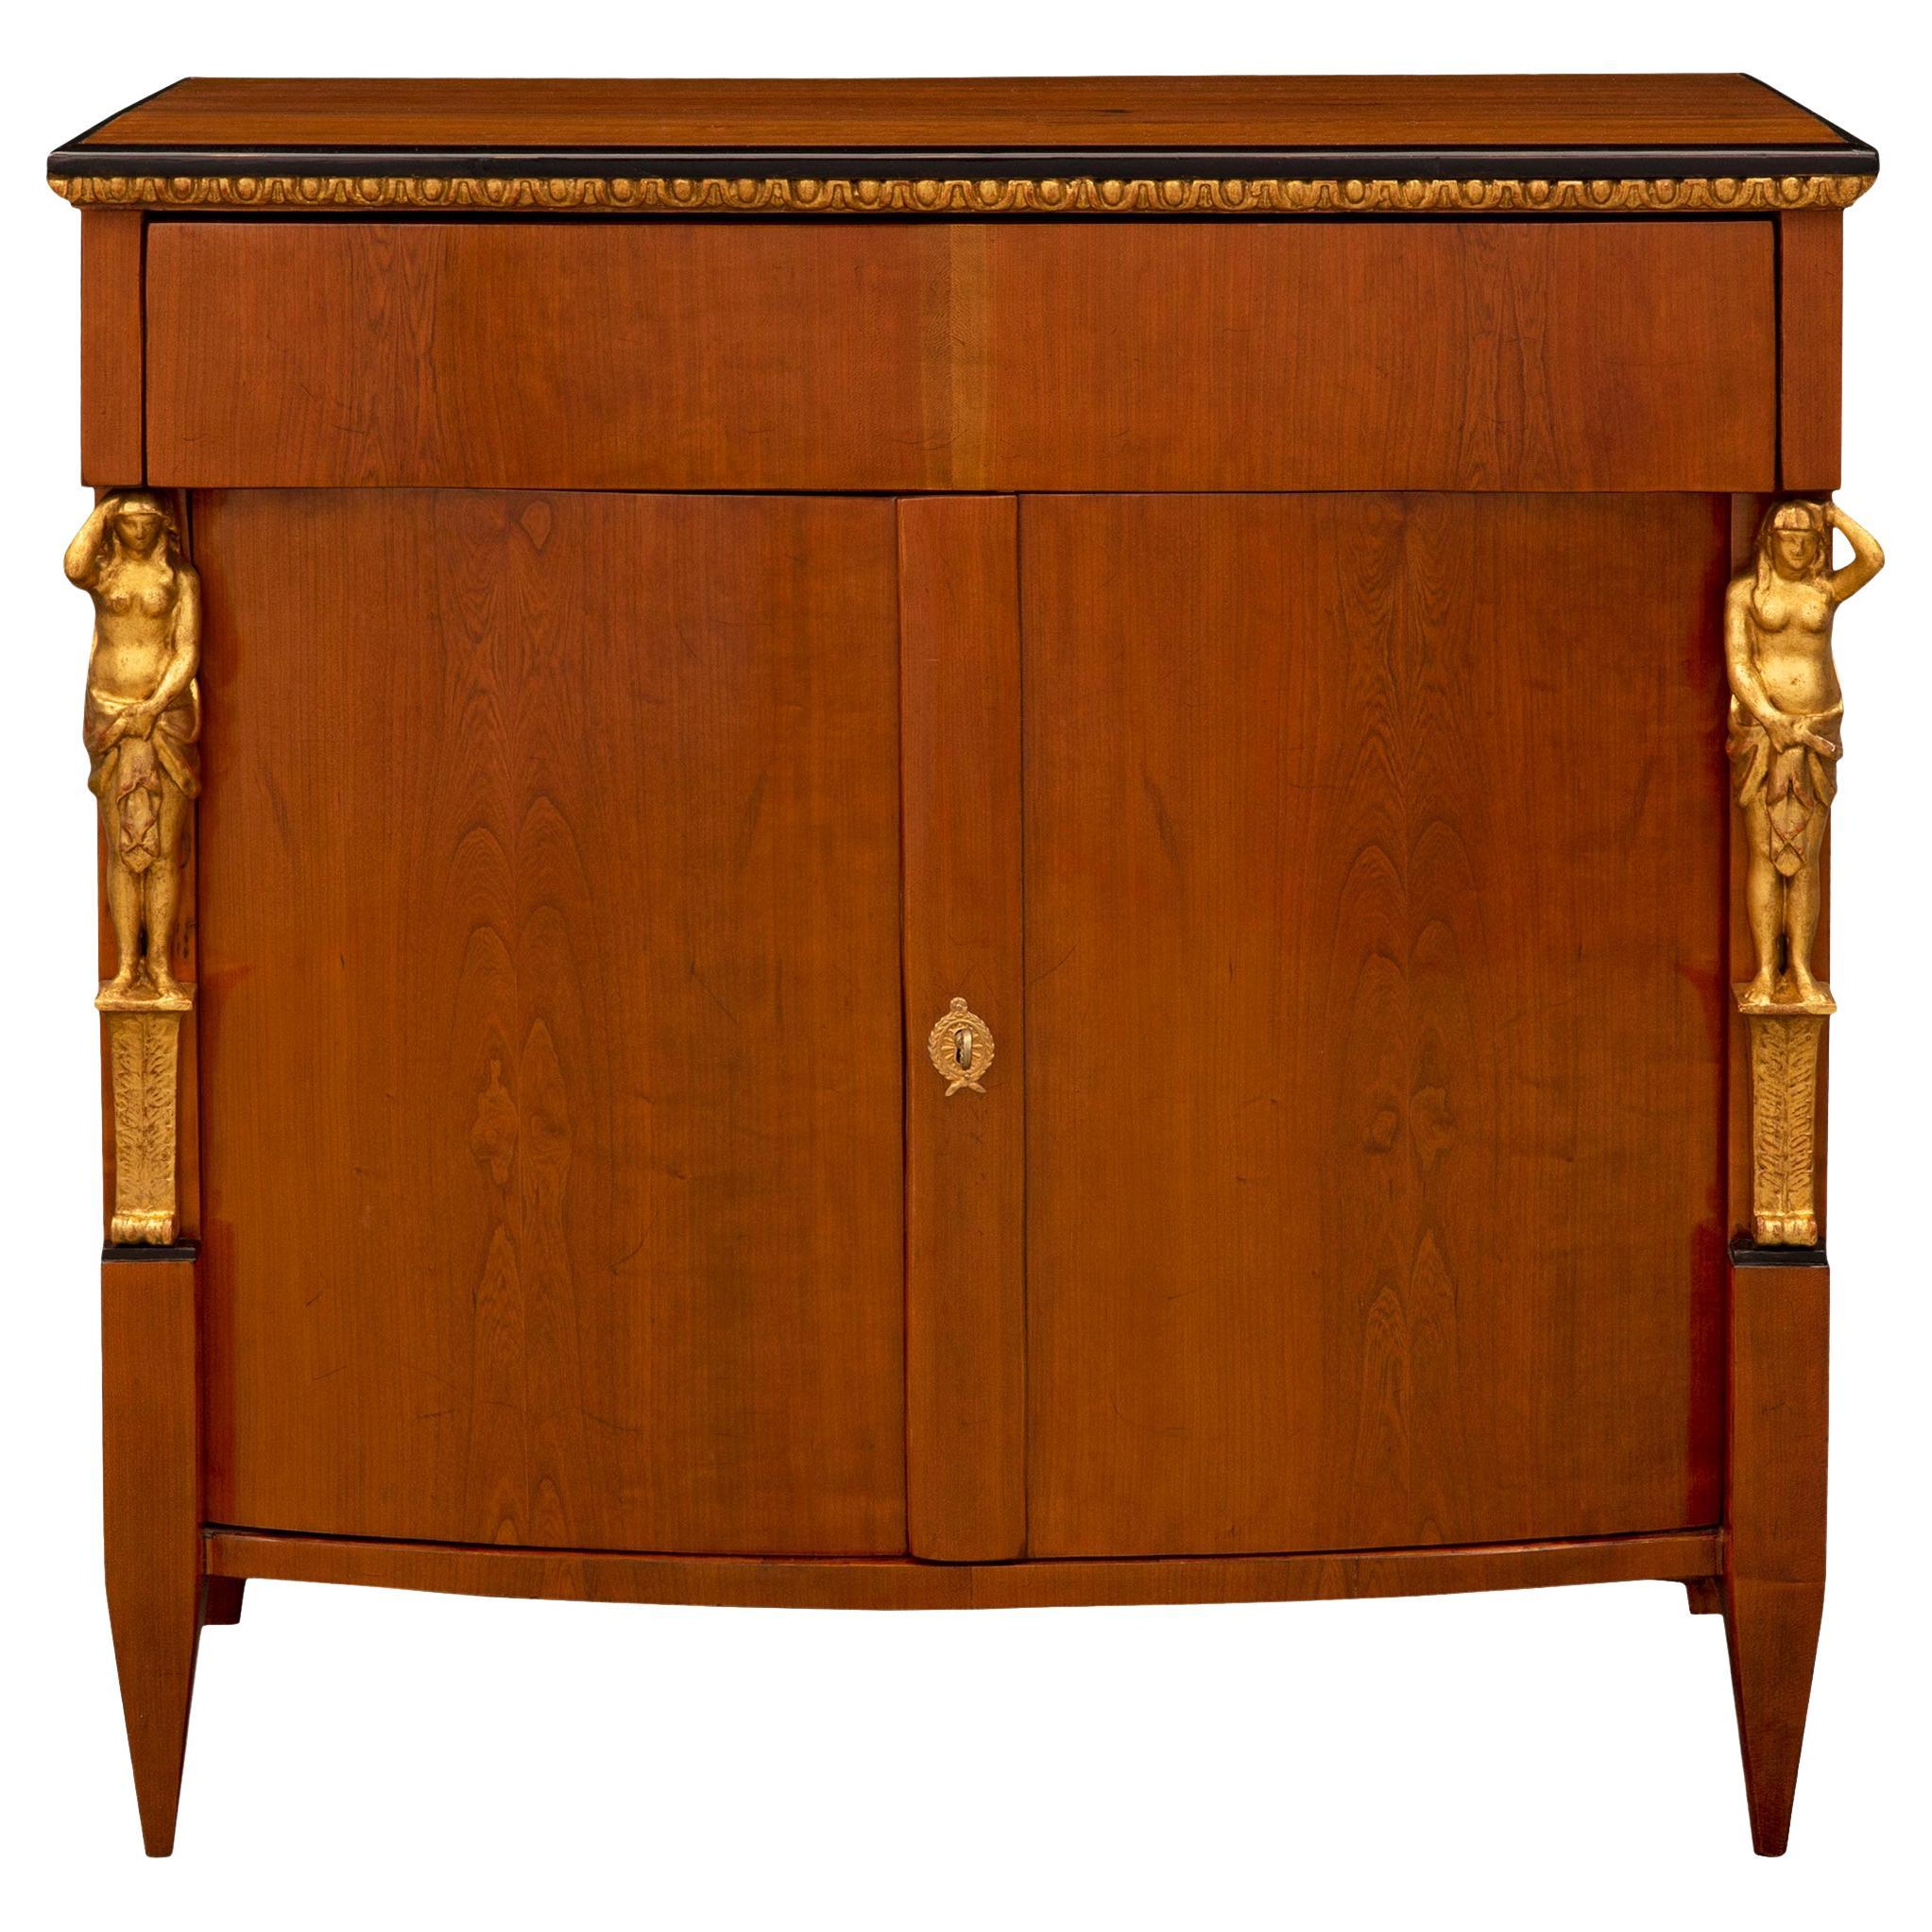 19th Century Neo-Classical St. Cherrywood, Fruitwood and Giltwood Cabinet